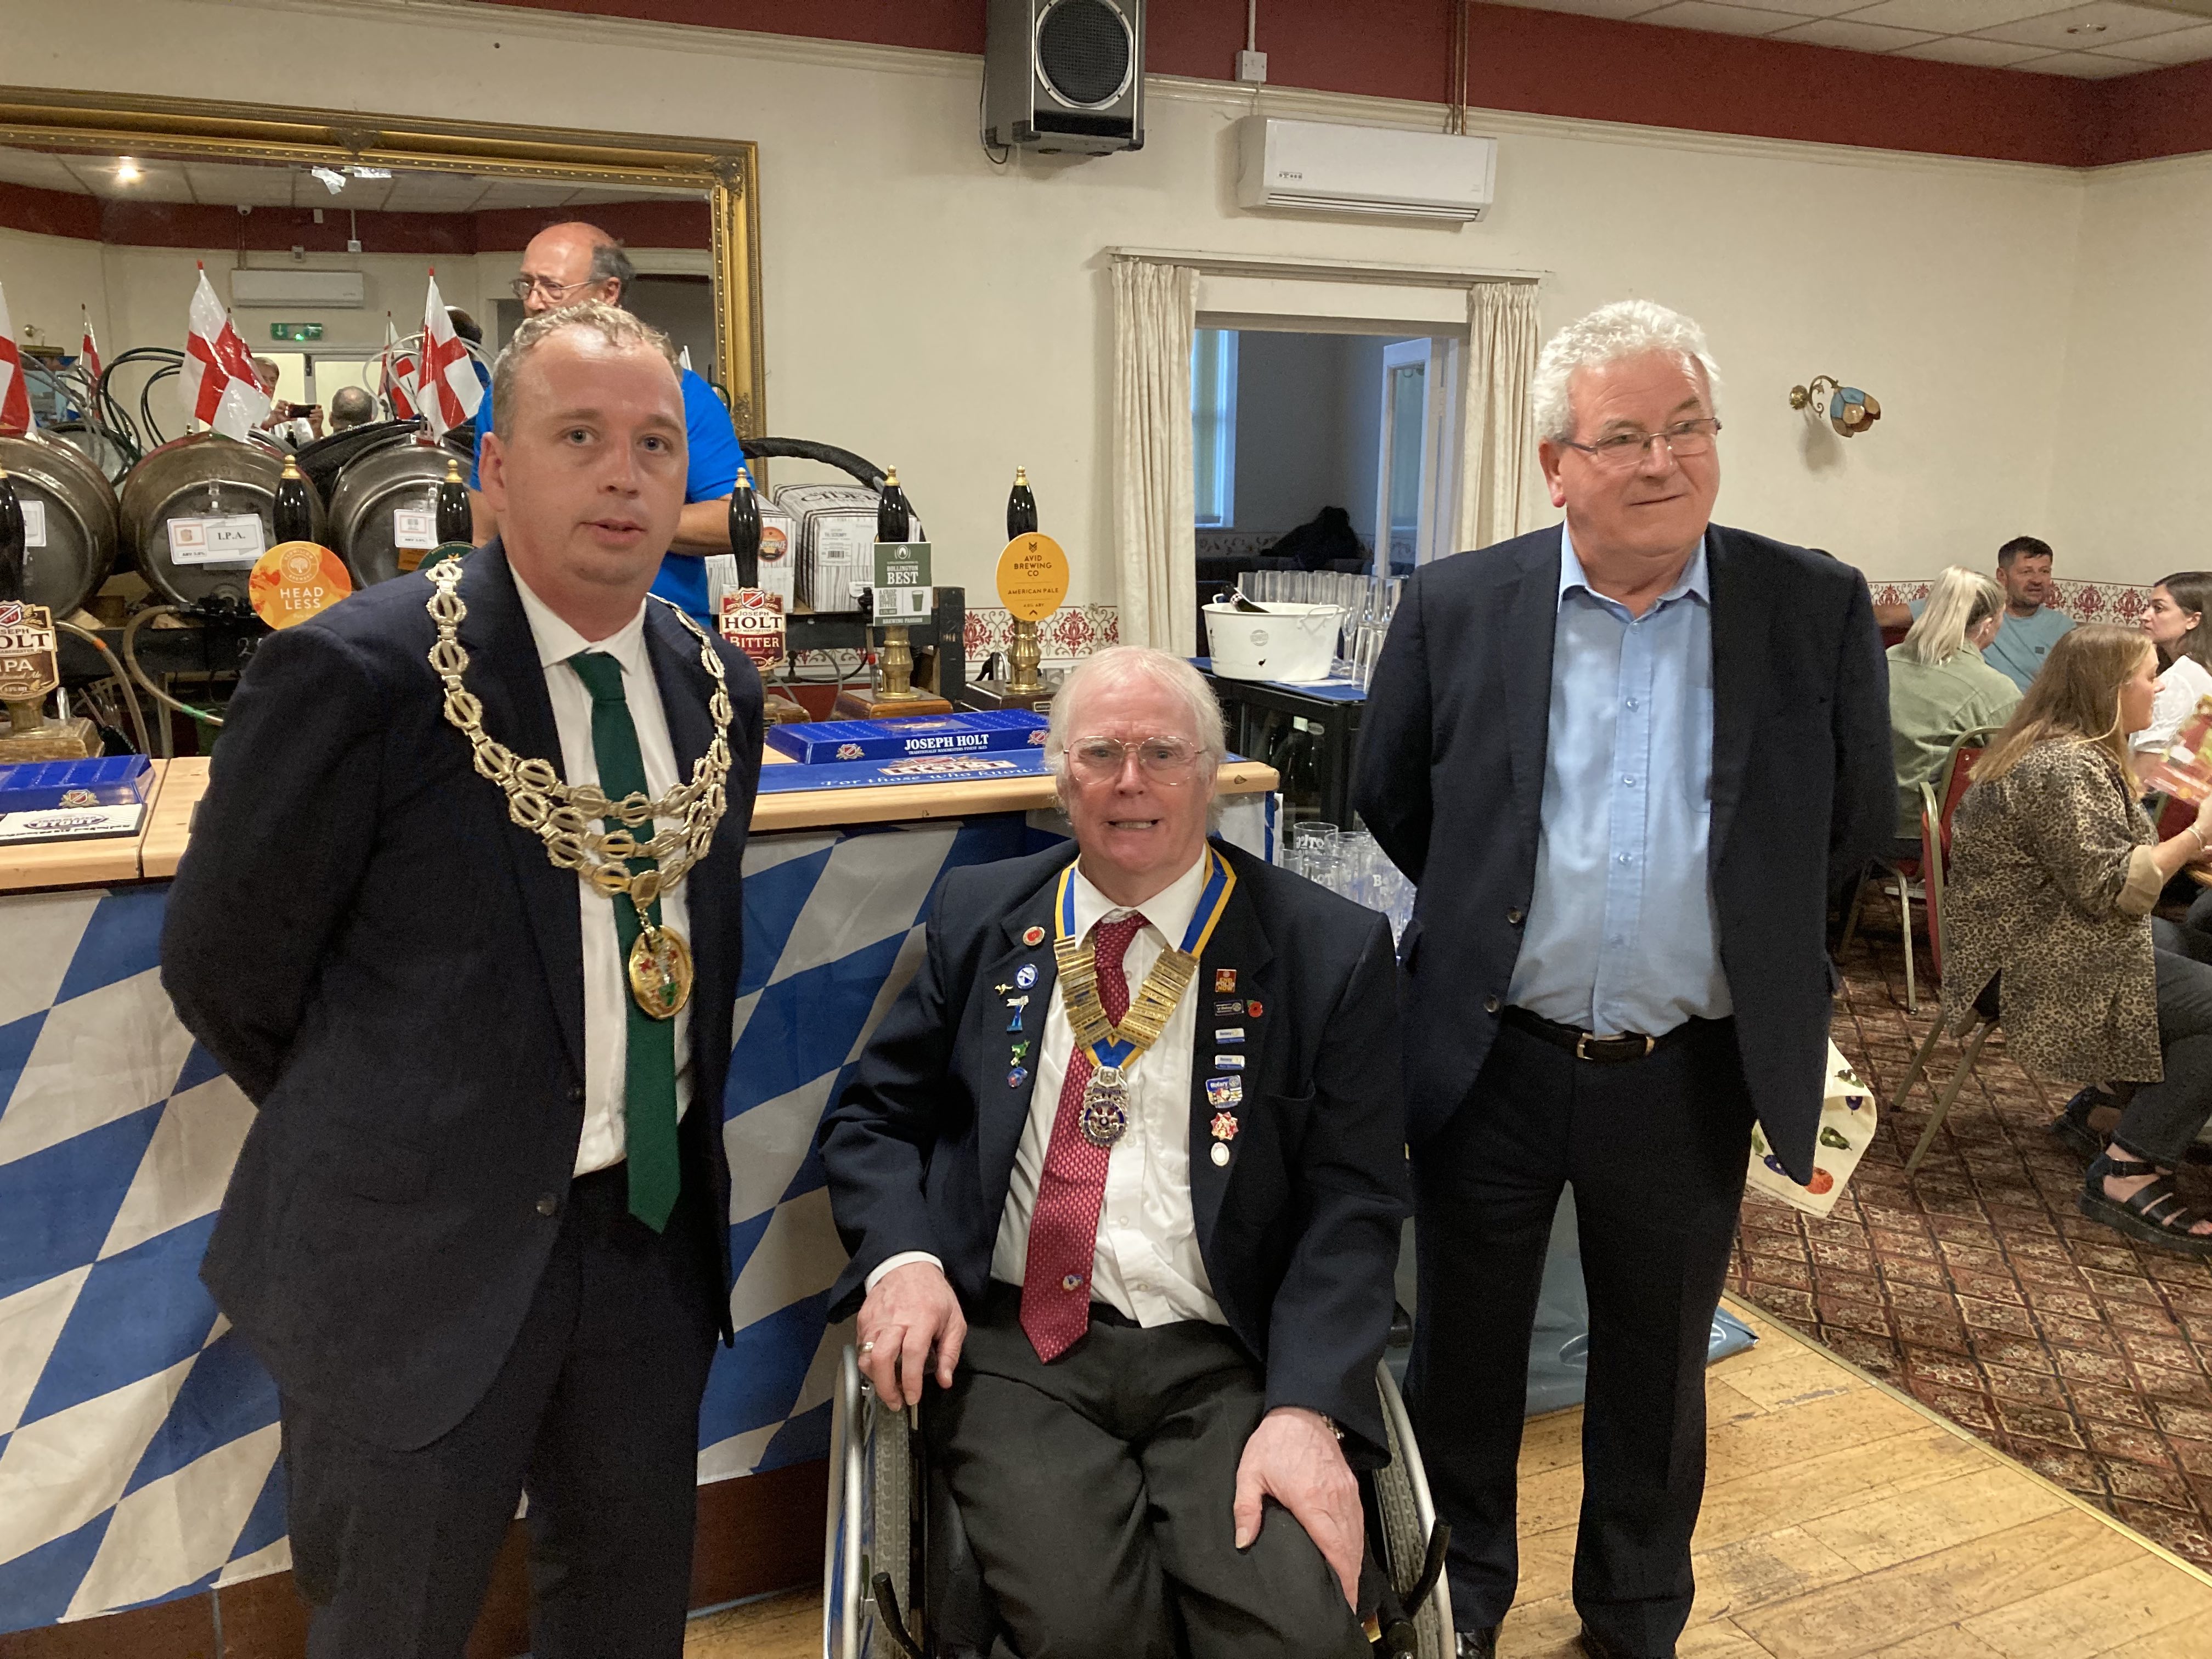 Mayor of Horwich, Horwich Rotary President and Mark Gebhard (Holts Brewery)